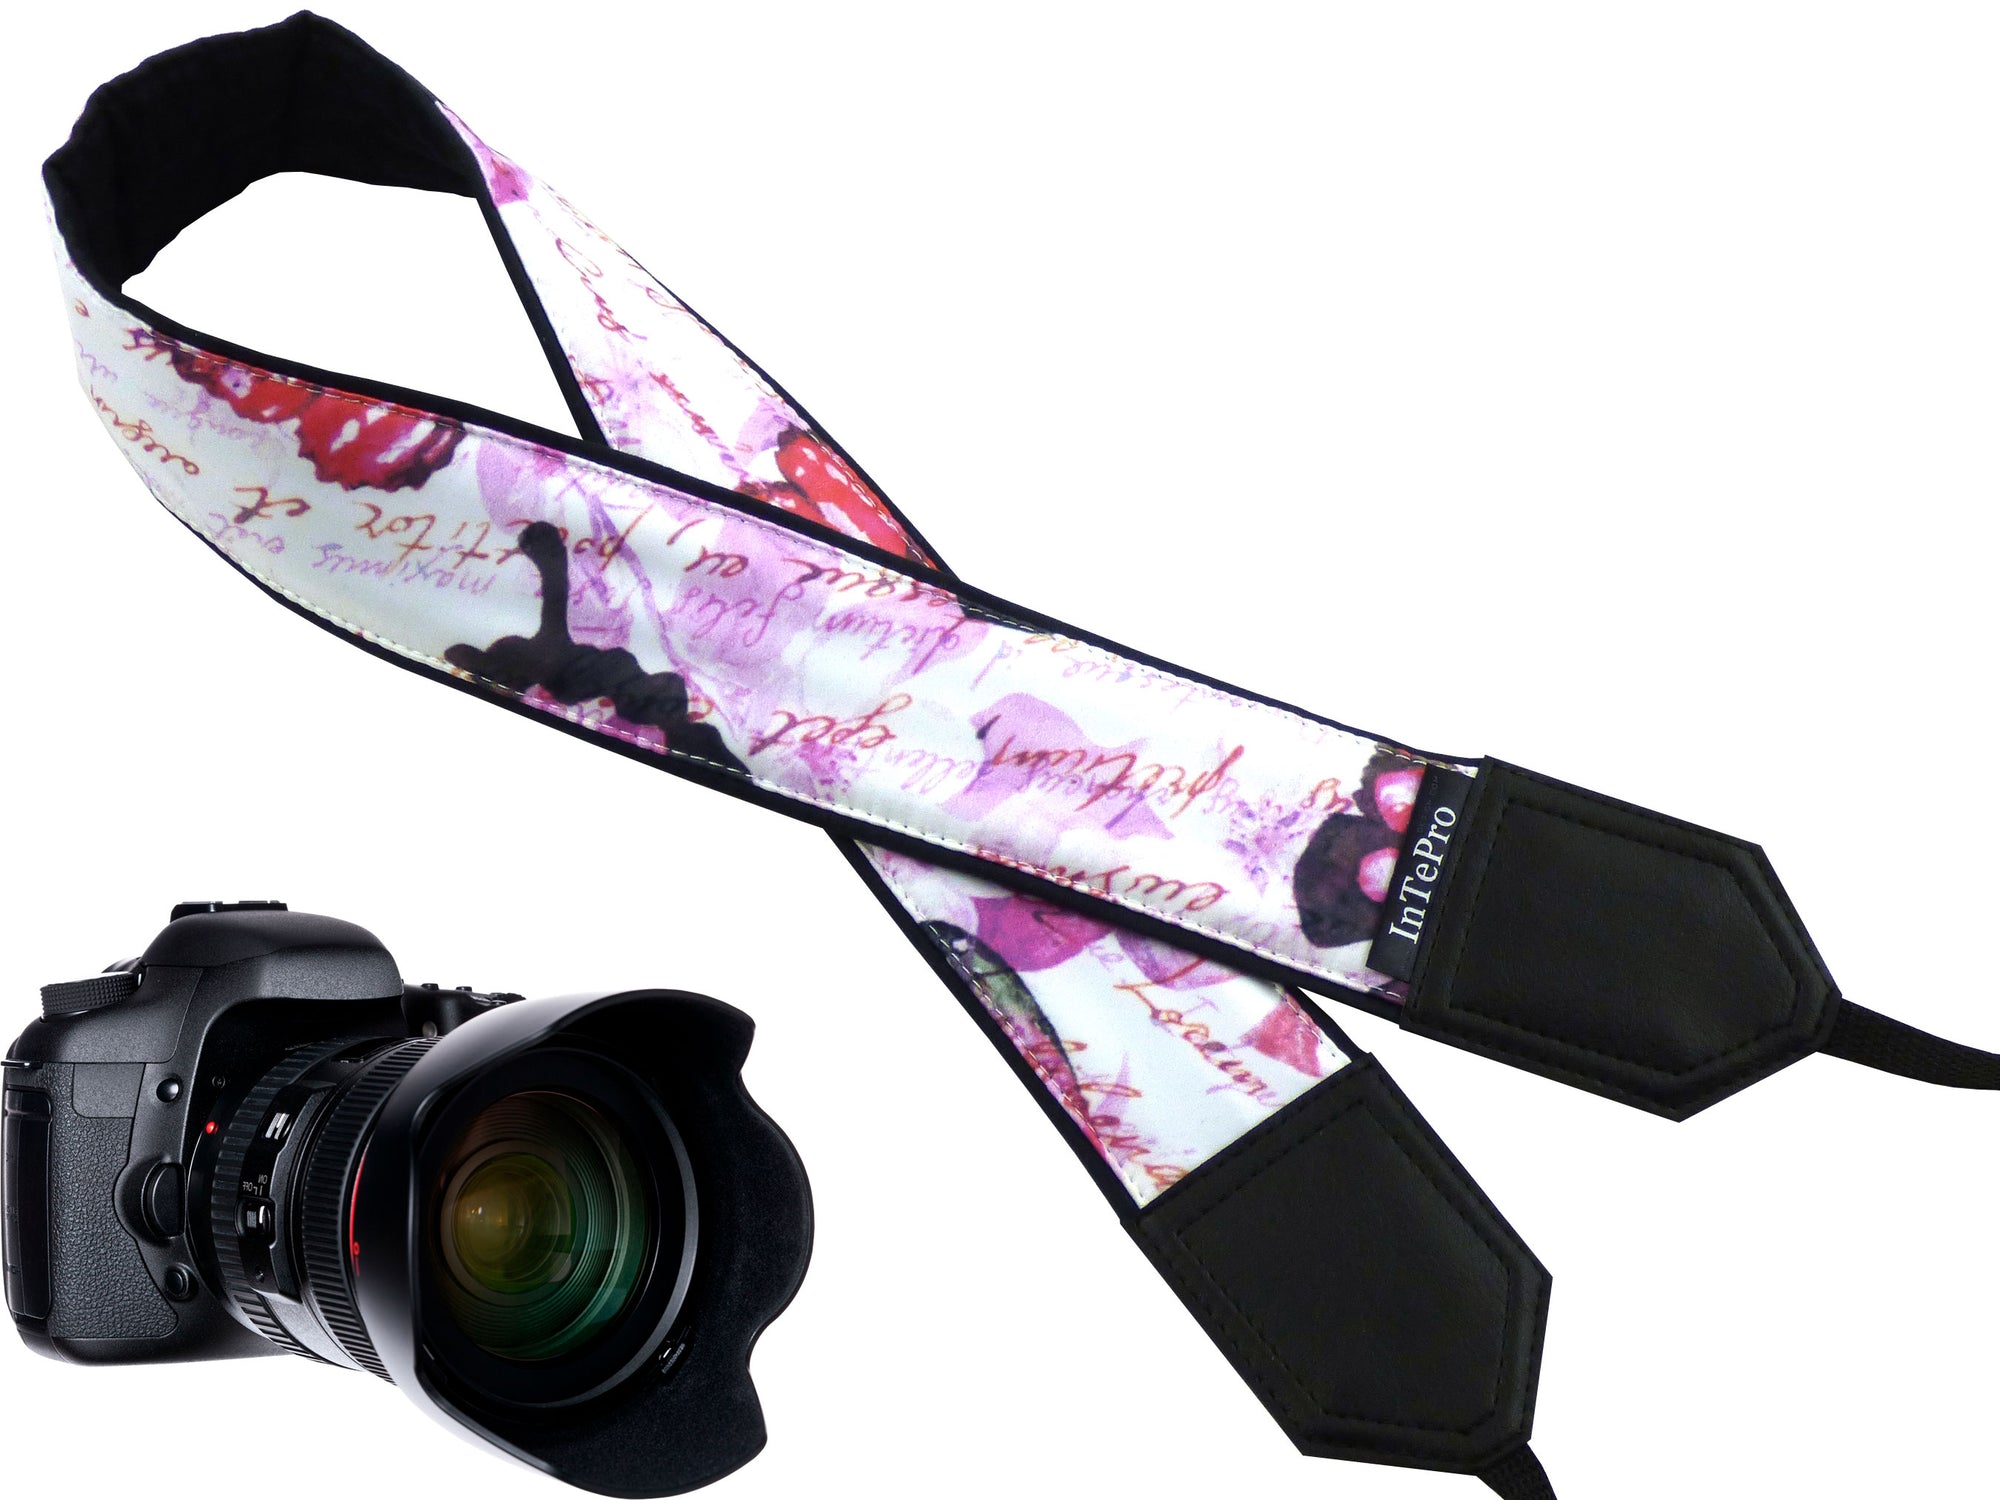 Butterfly camera strap with personalization. Photo accessory and great gift for photographers and travelers